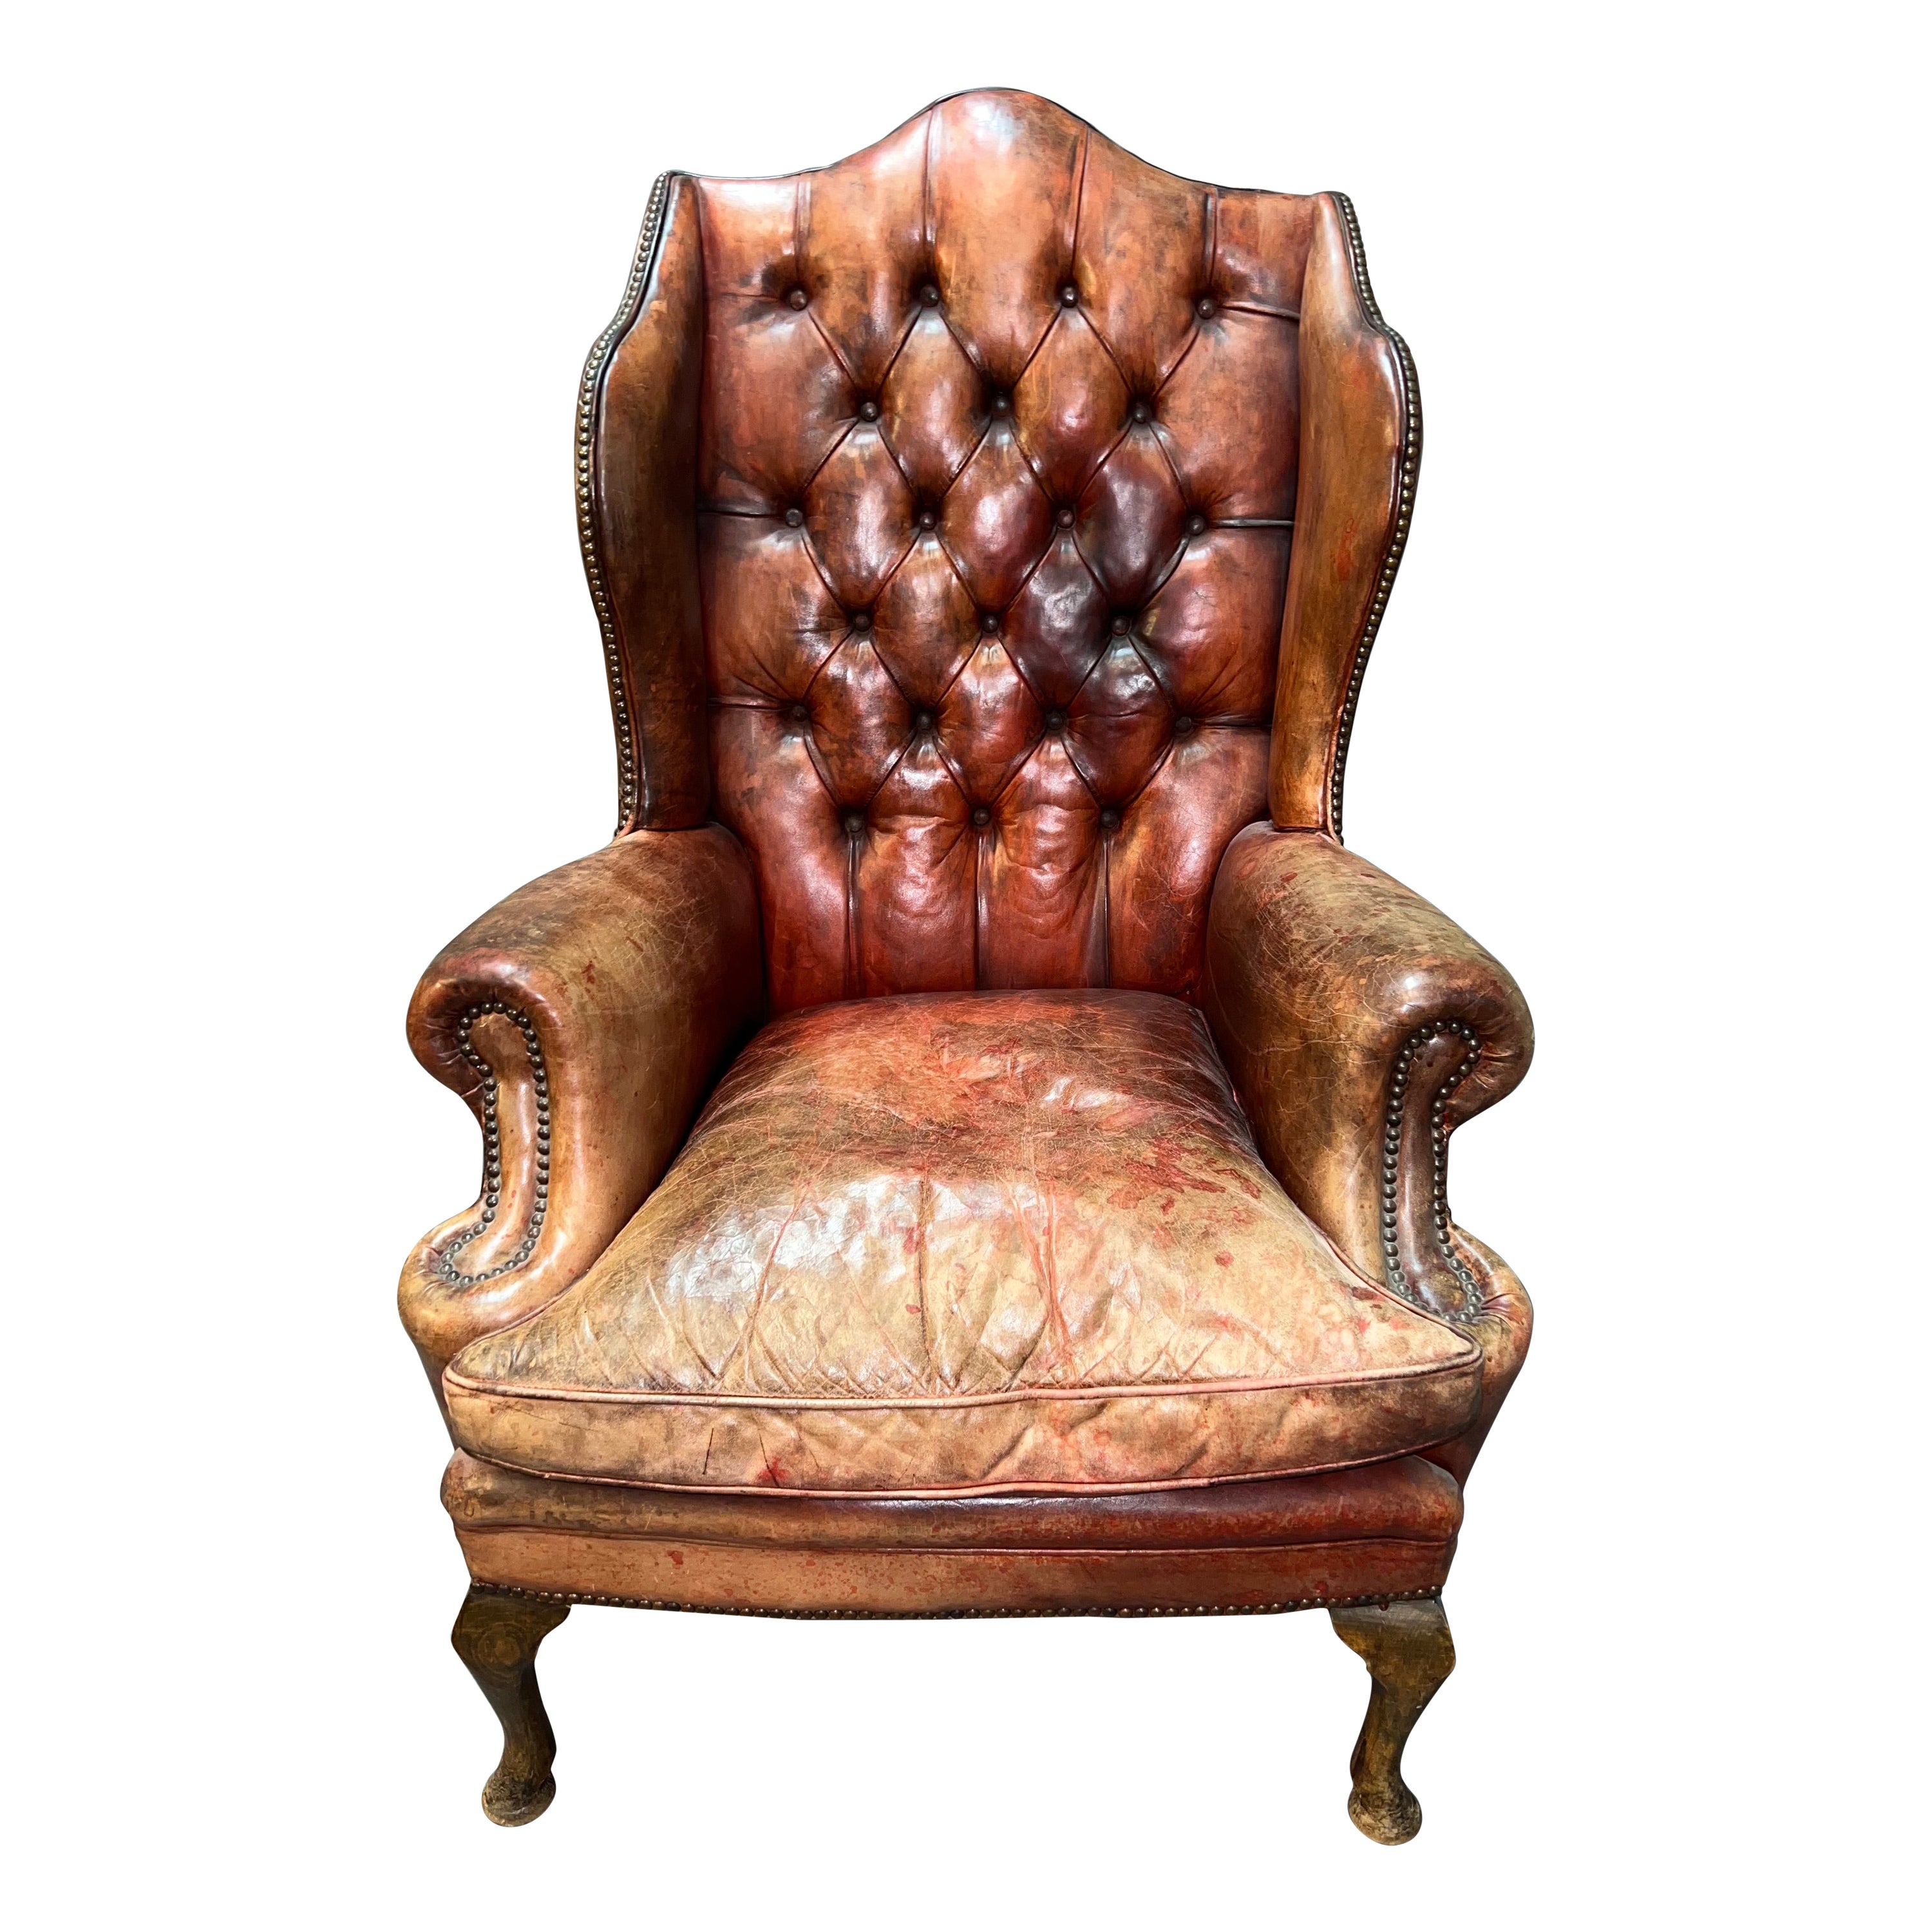 Vintage Brown Leather Tufted Chesterfield Wingback Armchair Original, circa 1880 For Sale